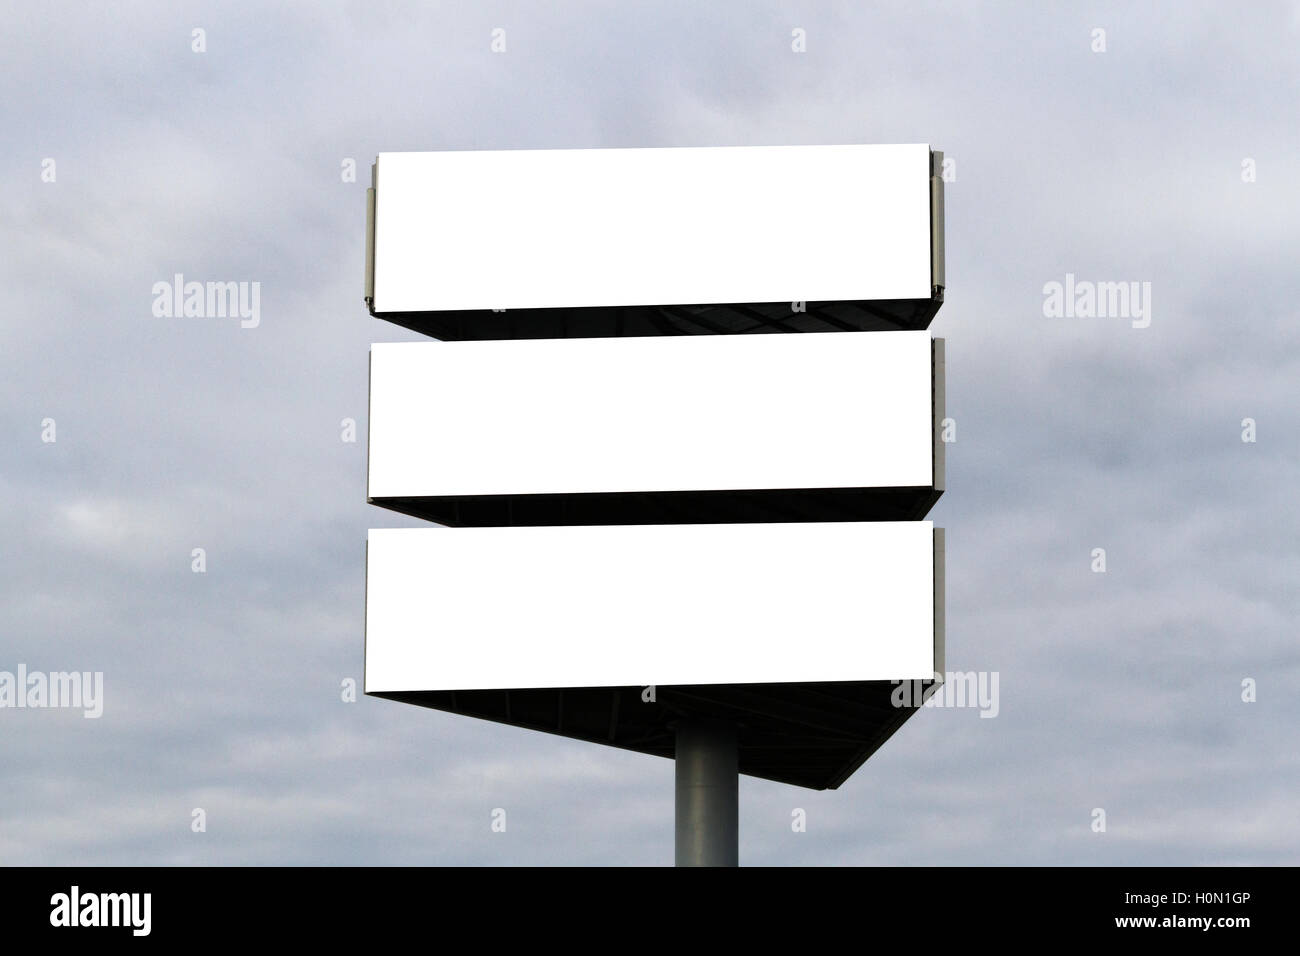 Mock up. Outdoor advertising, blank billboard outdoors, public information board on city road Stock Photo